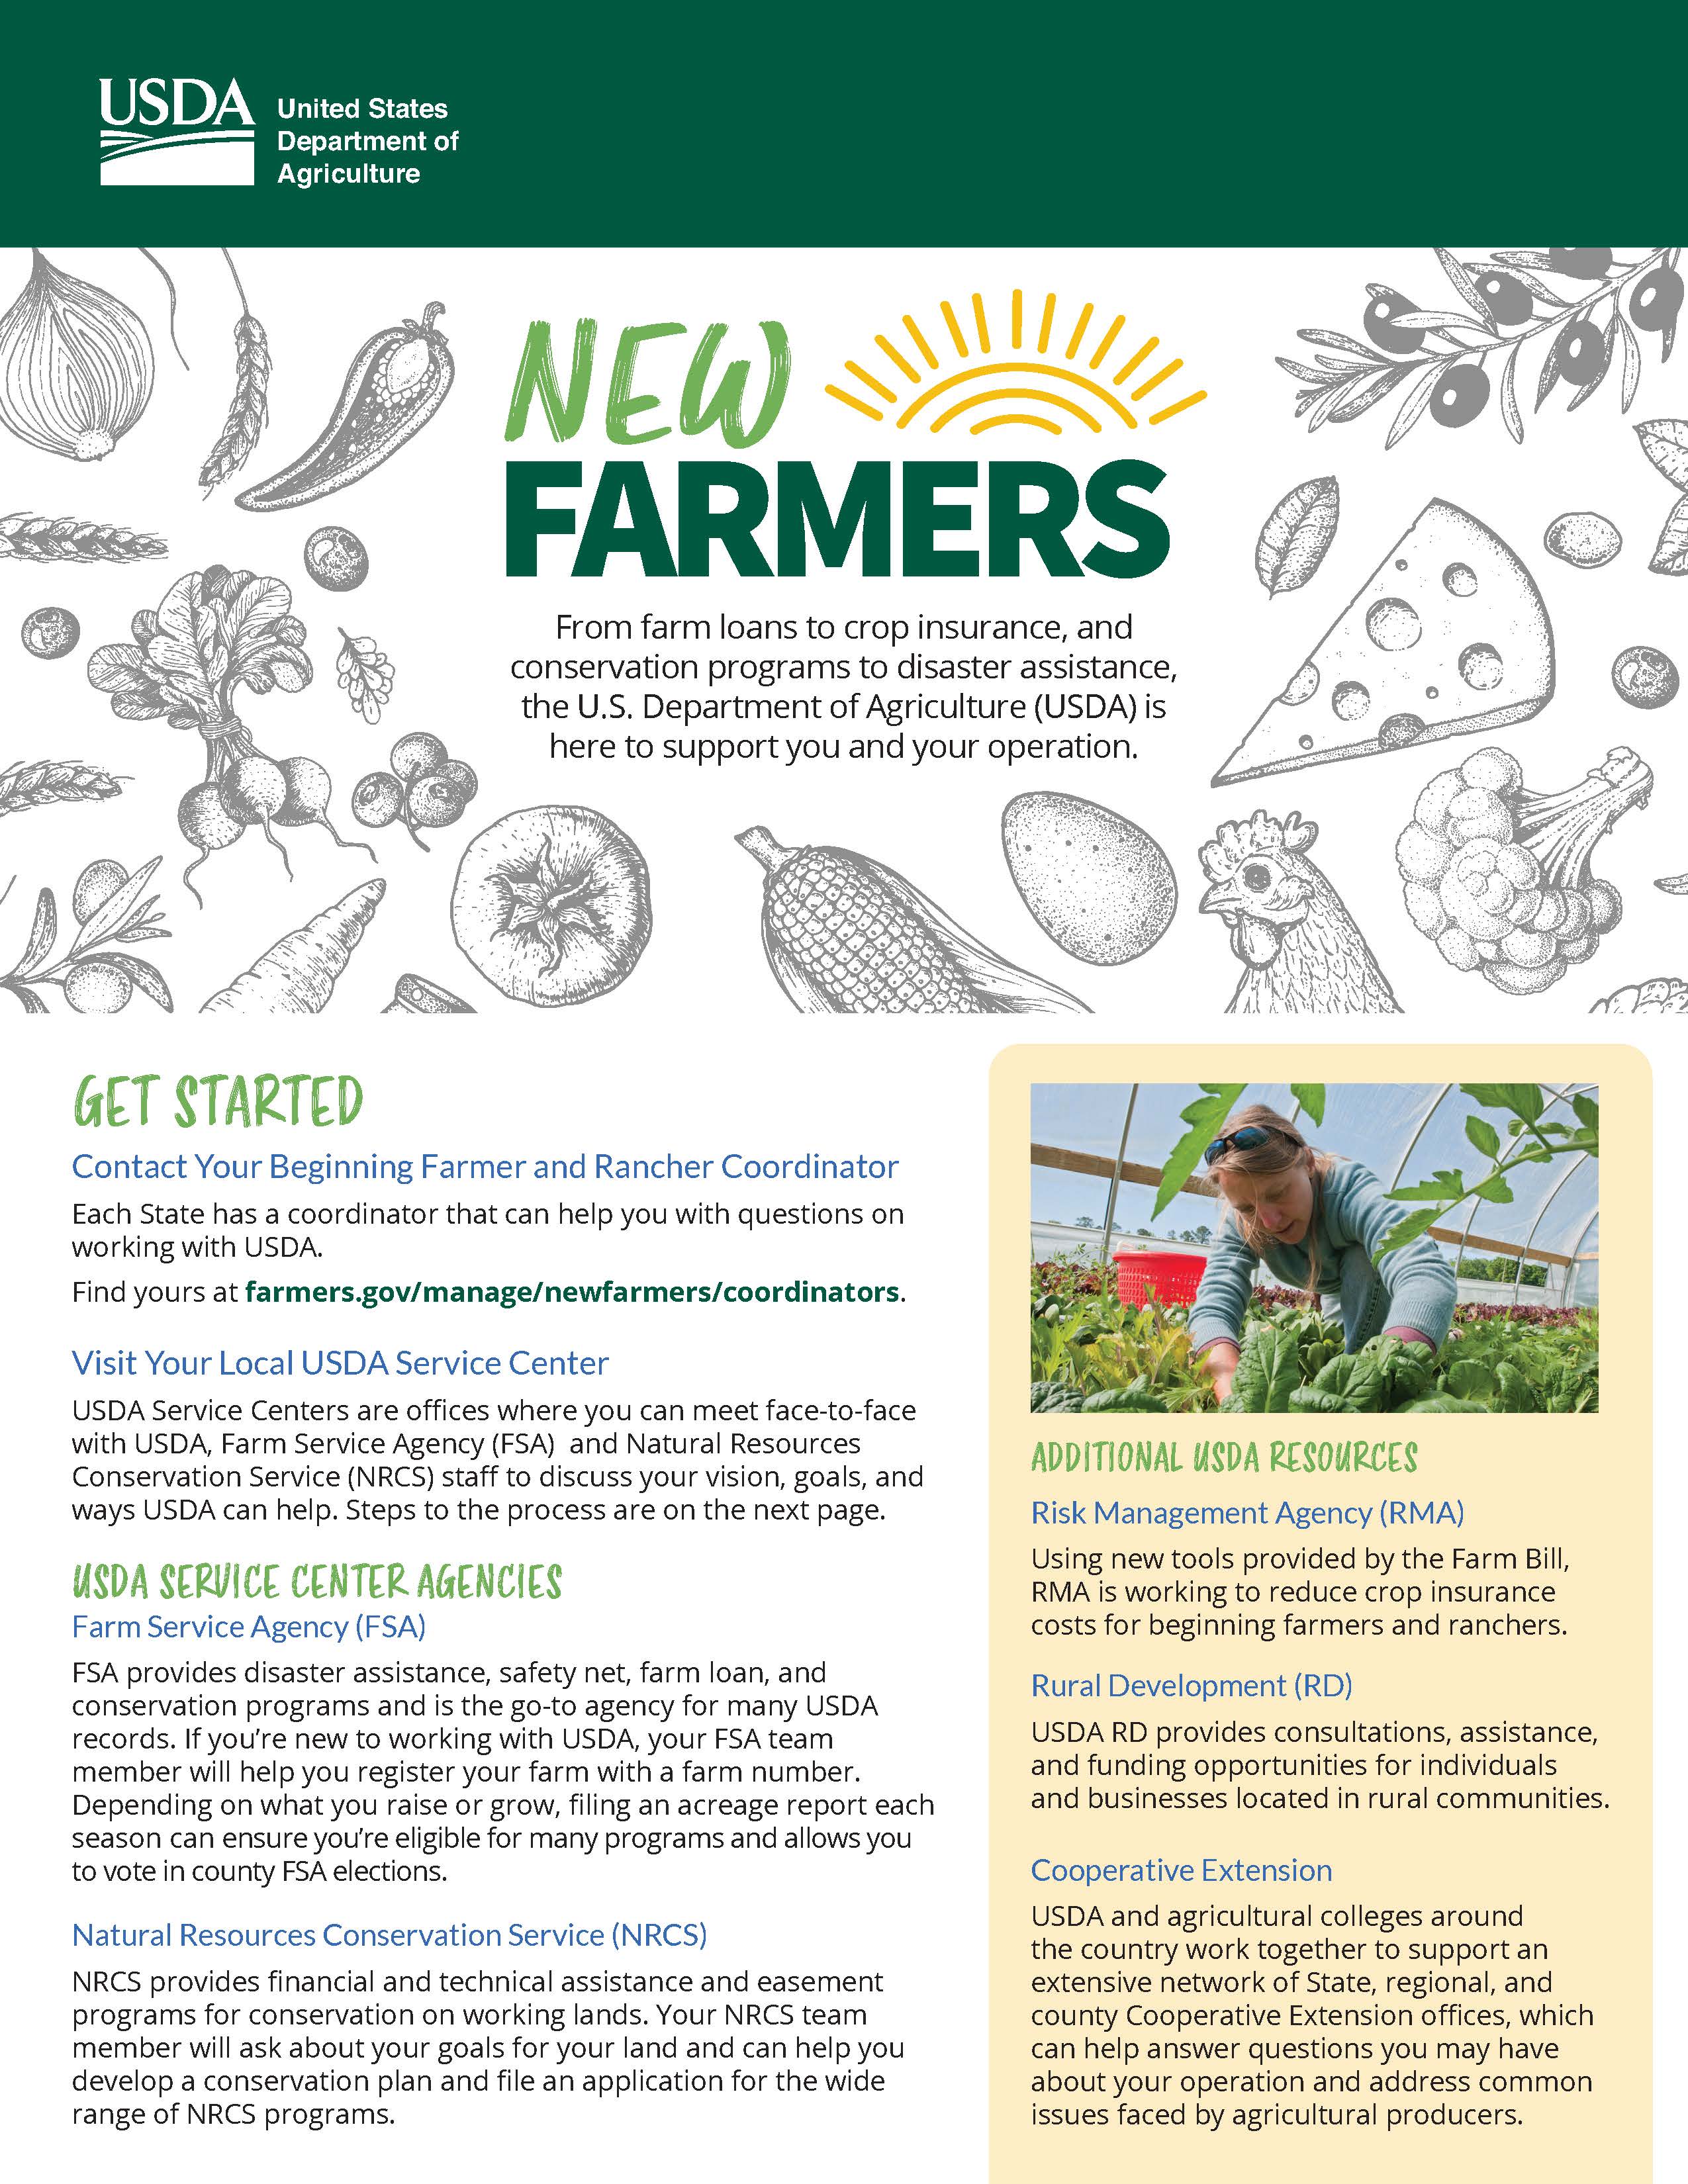 Farmers.gov New Farmers Get Started fact sheet